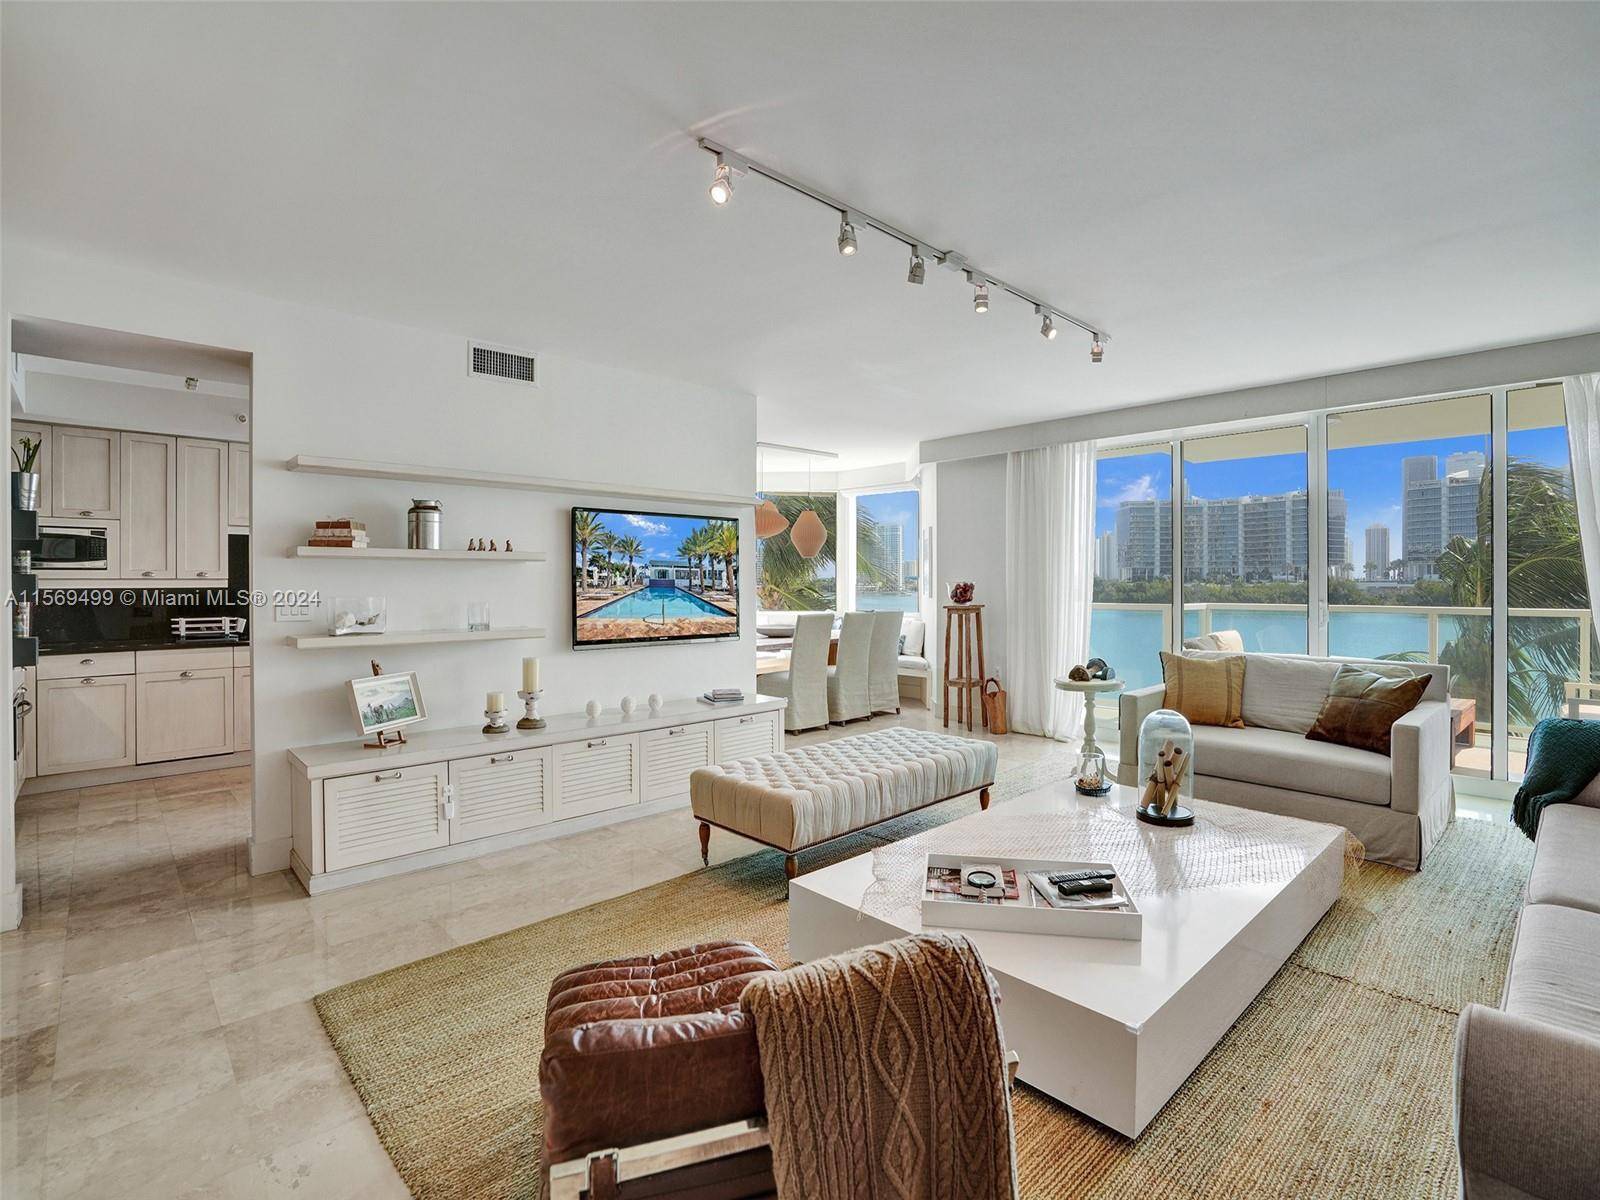 Step into this stunningly renovated and furnished apartment offering unparalleled views of the Intracoastal Waterway.